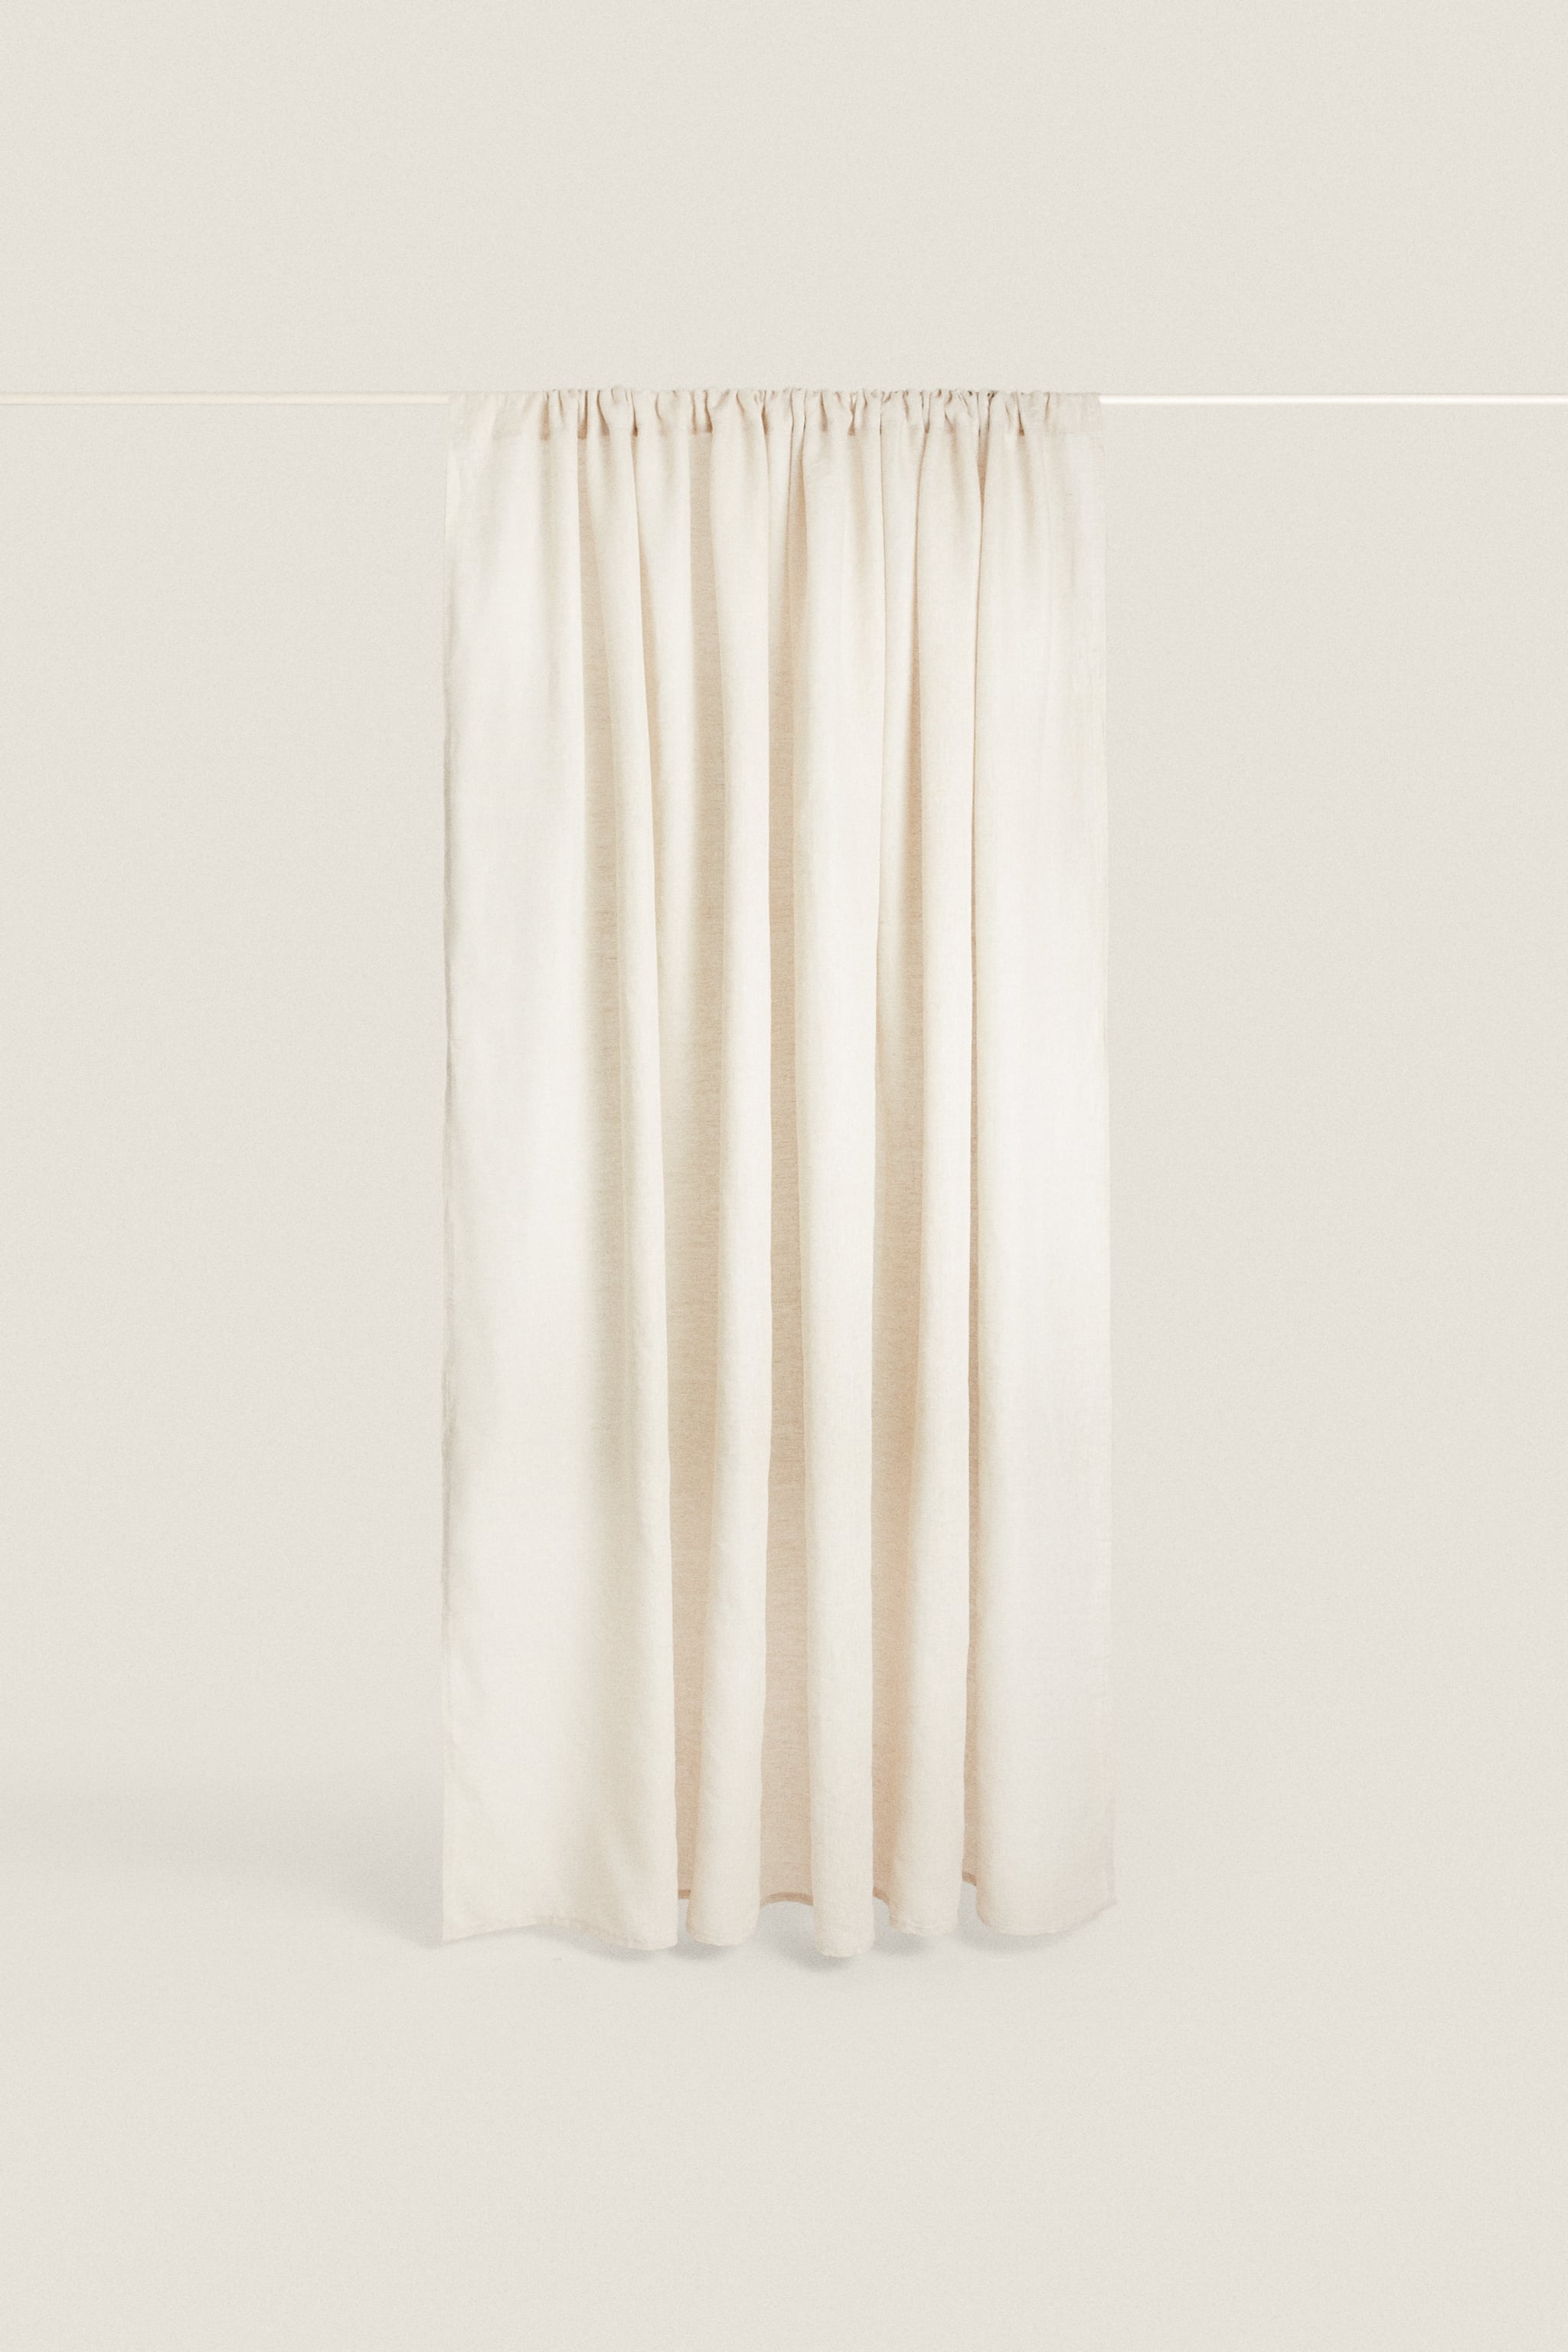 WASHED LINEN CURTAIN 110.2" x 118.1"